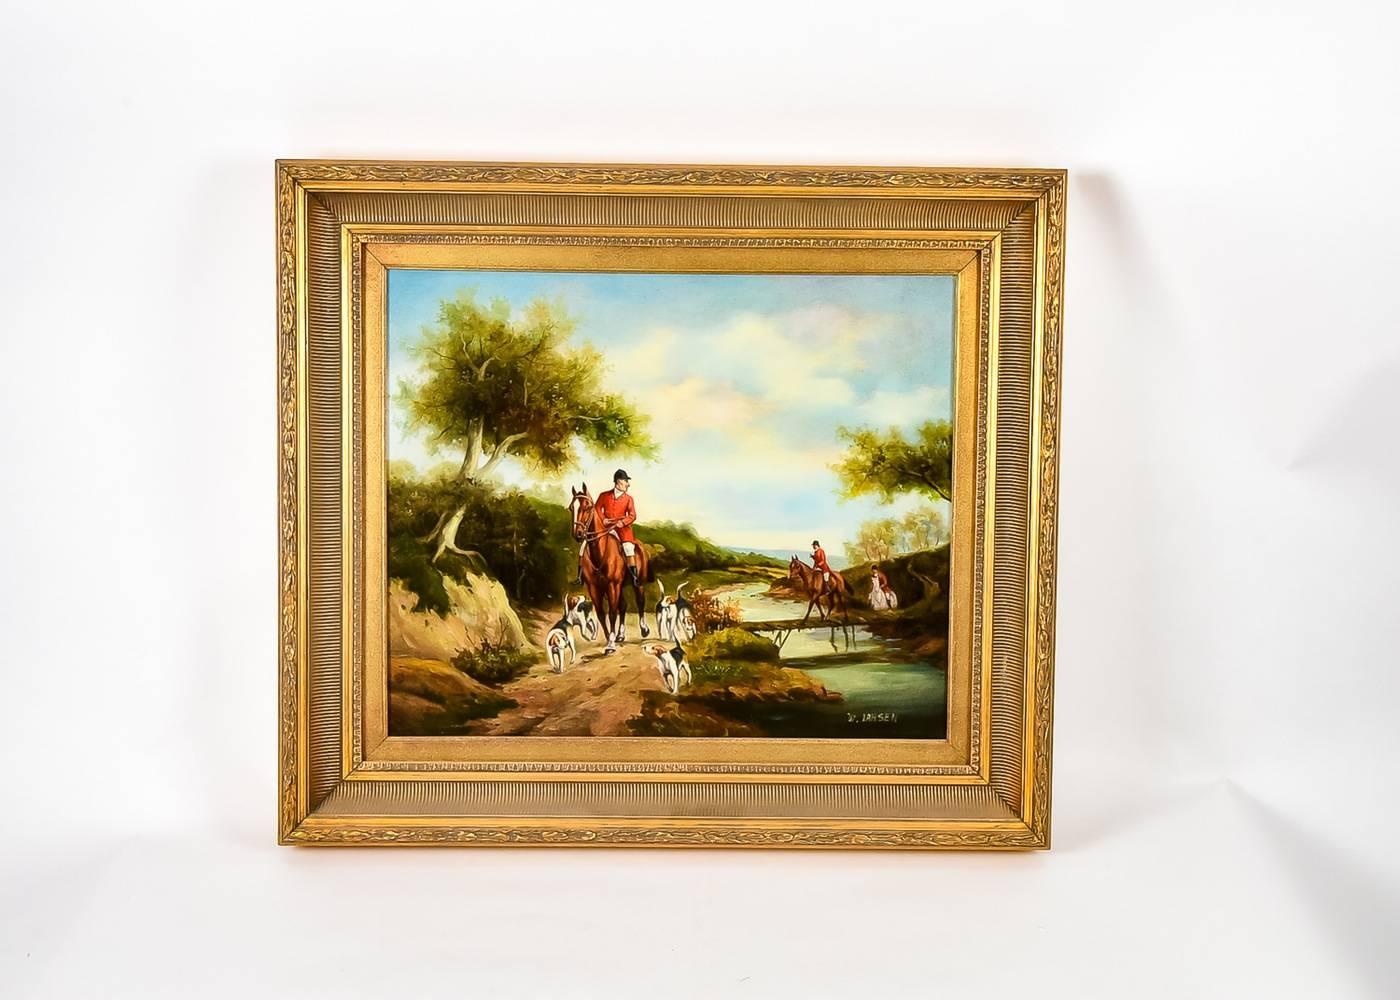 W. Larsen Figurative Painting - Antique English Fox Hunt Oil Painting Signed by Artist